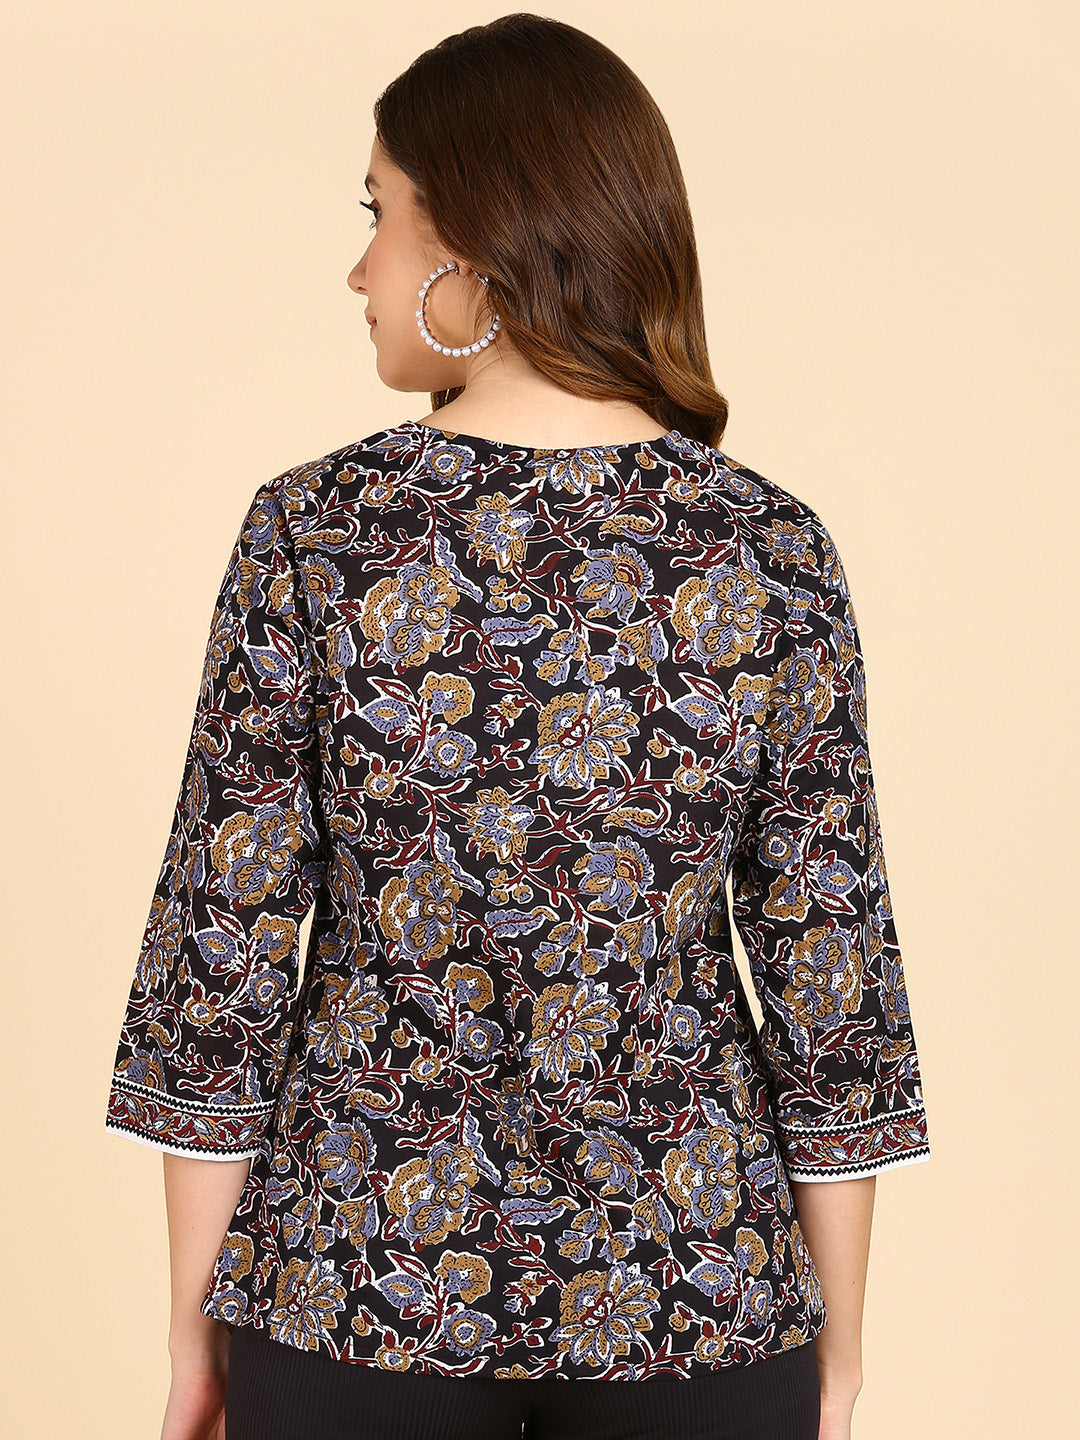 Black Floral Printed Top With Front Border Details